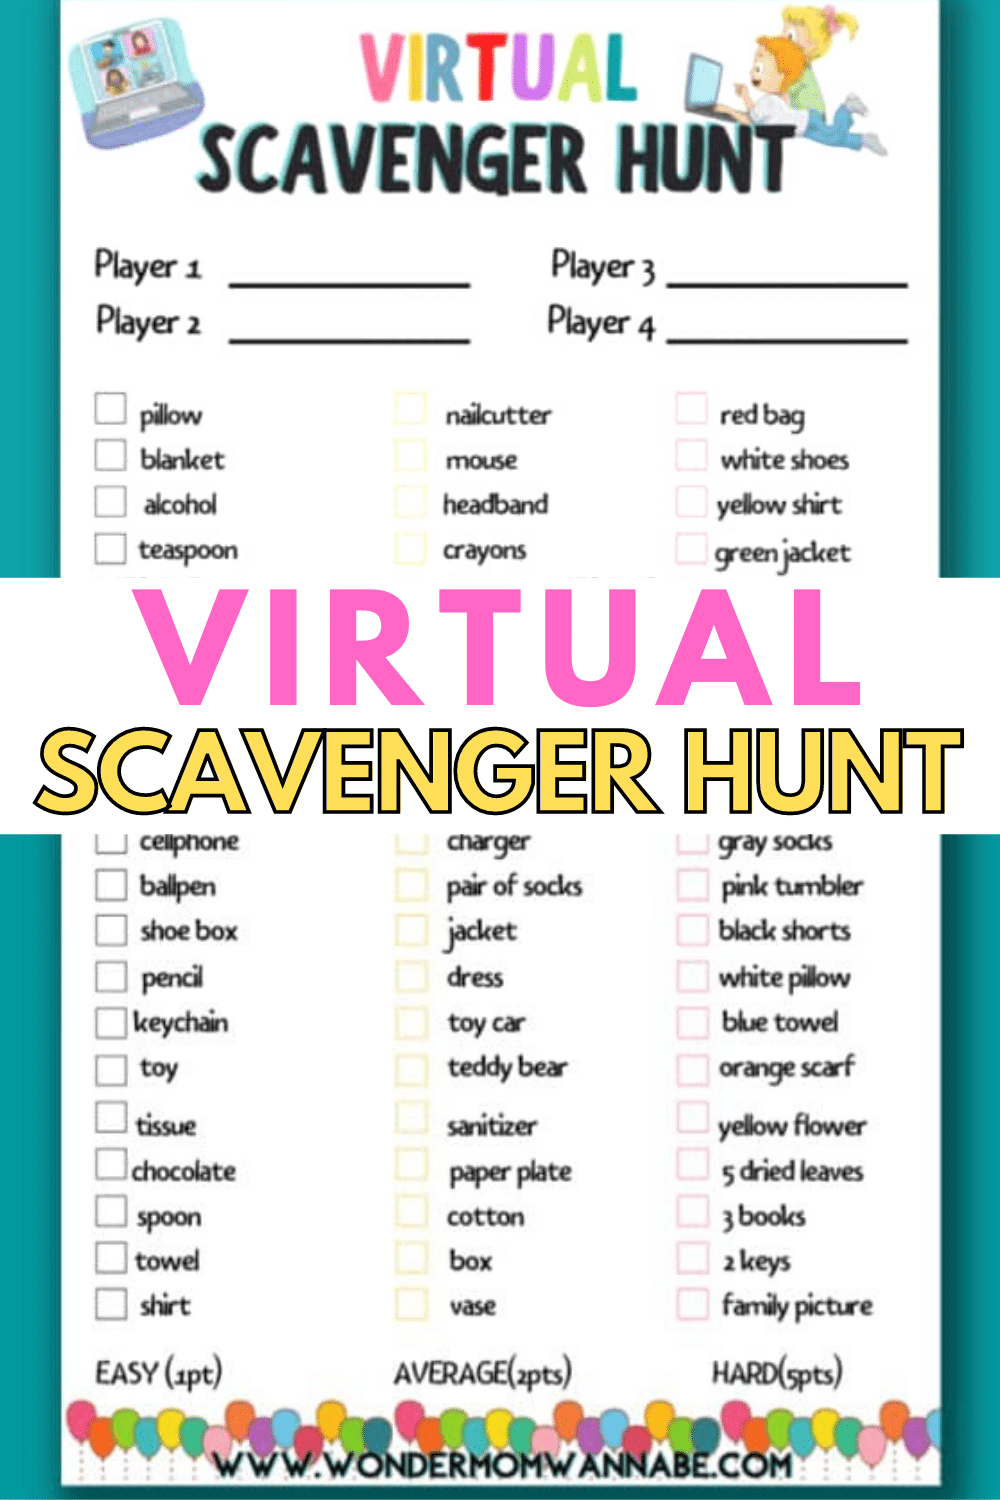 A printable Virtual Scavenger Hunt is a great way to connect with friends virtually while playing a fun and interactive game. #scavengerhunt #printables #virtualgames via @wondermomwannab